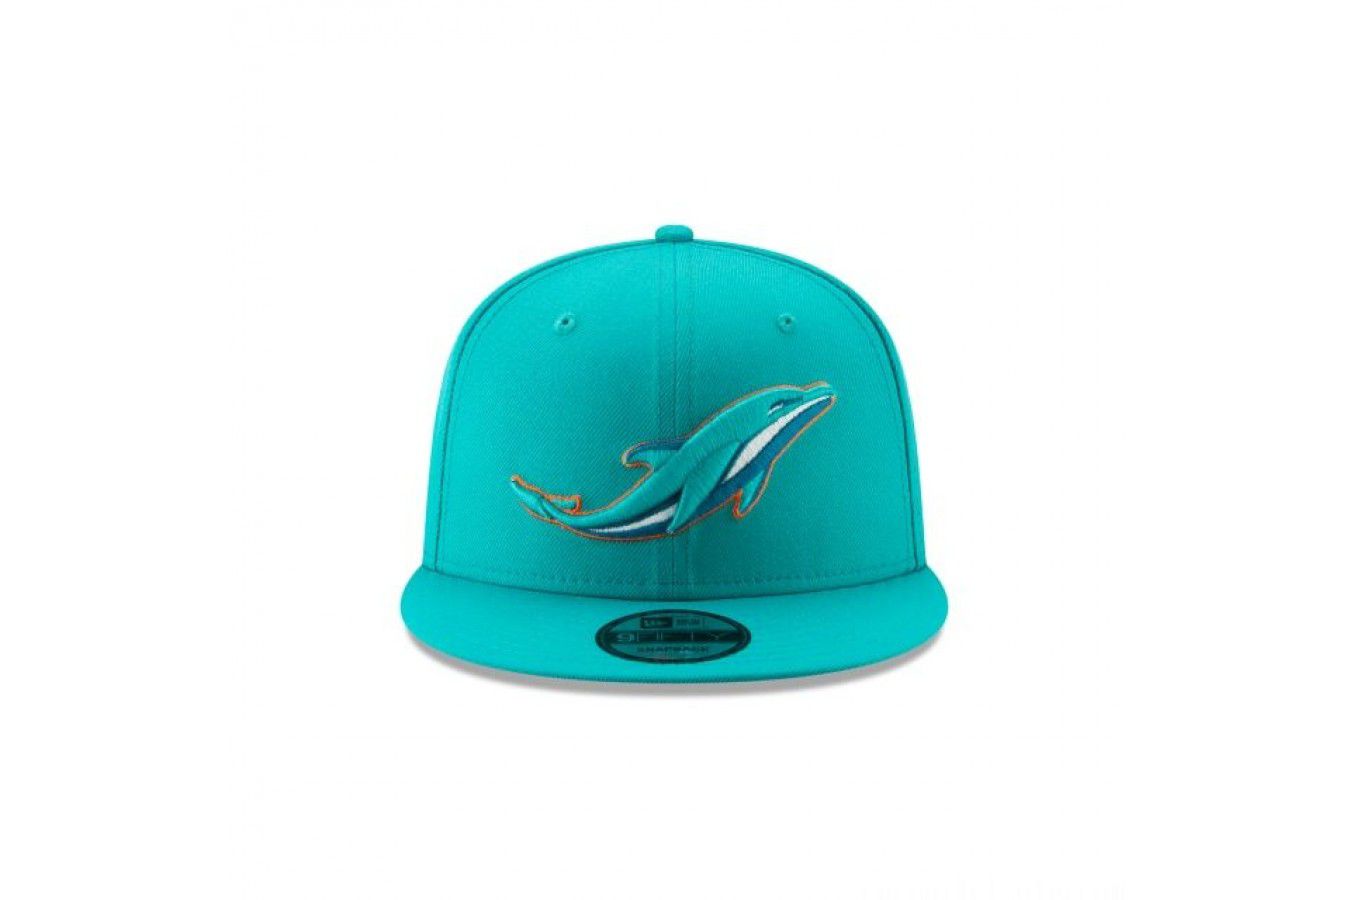 2023 NFL Miami Dolphins Hat TX 20230821